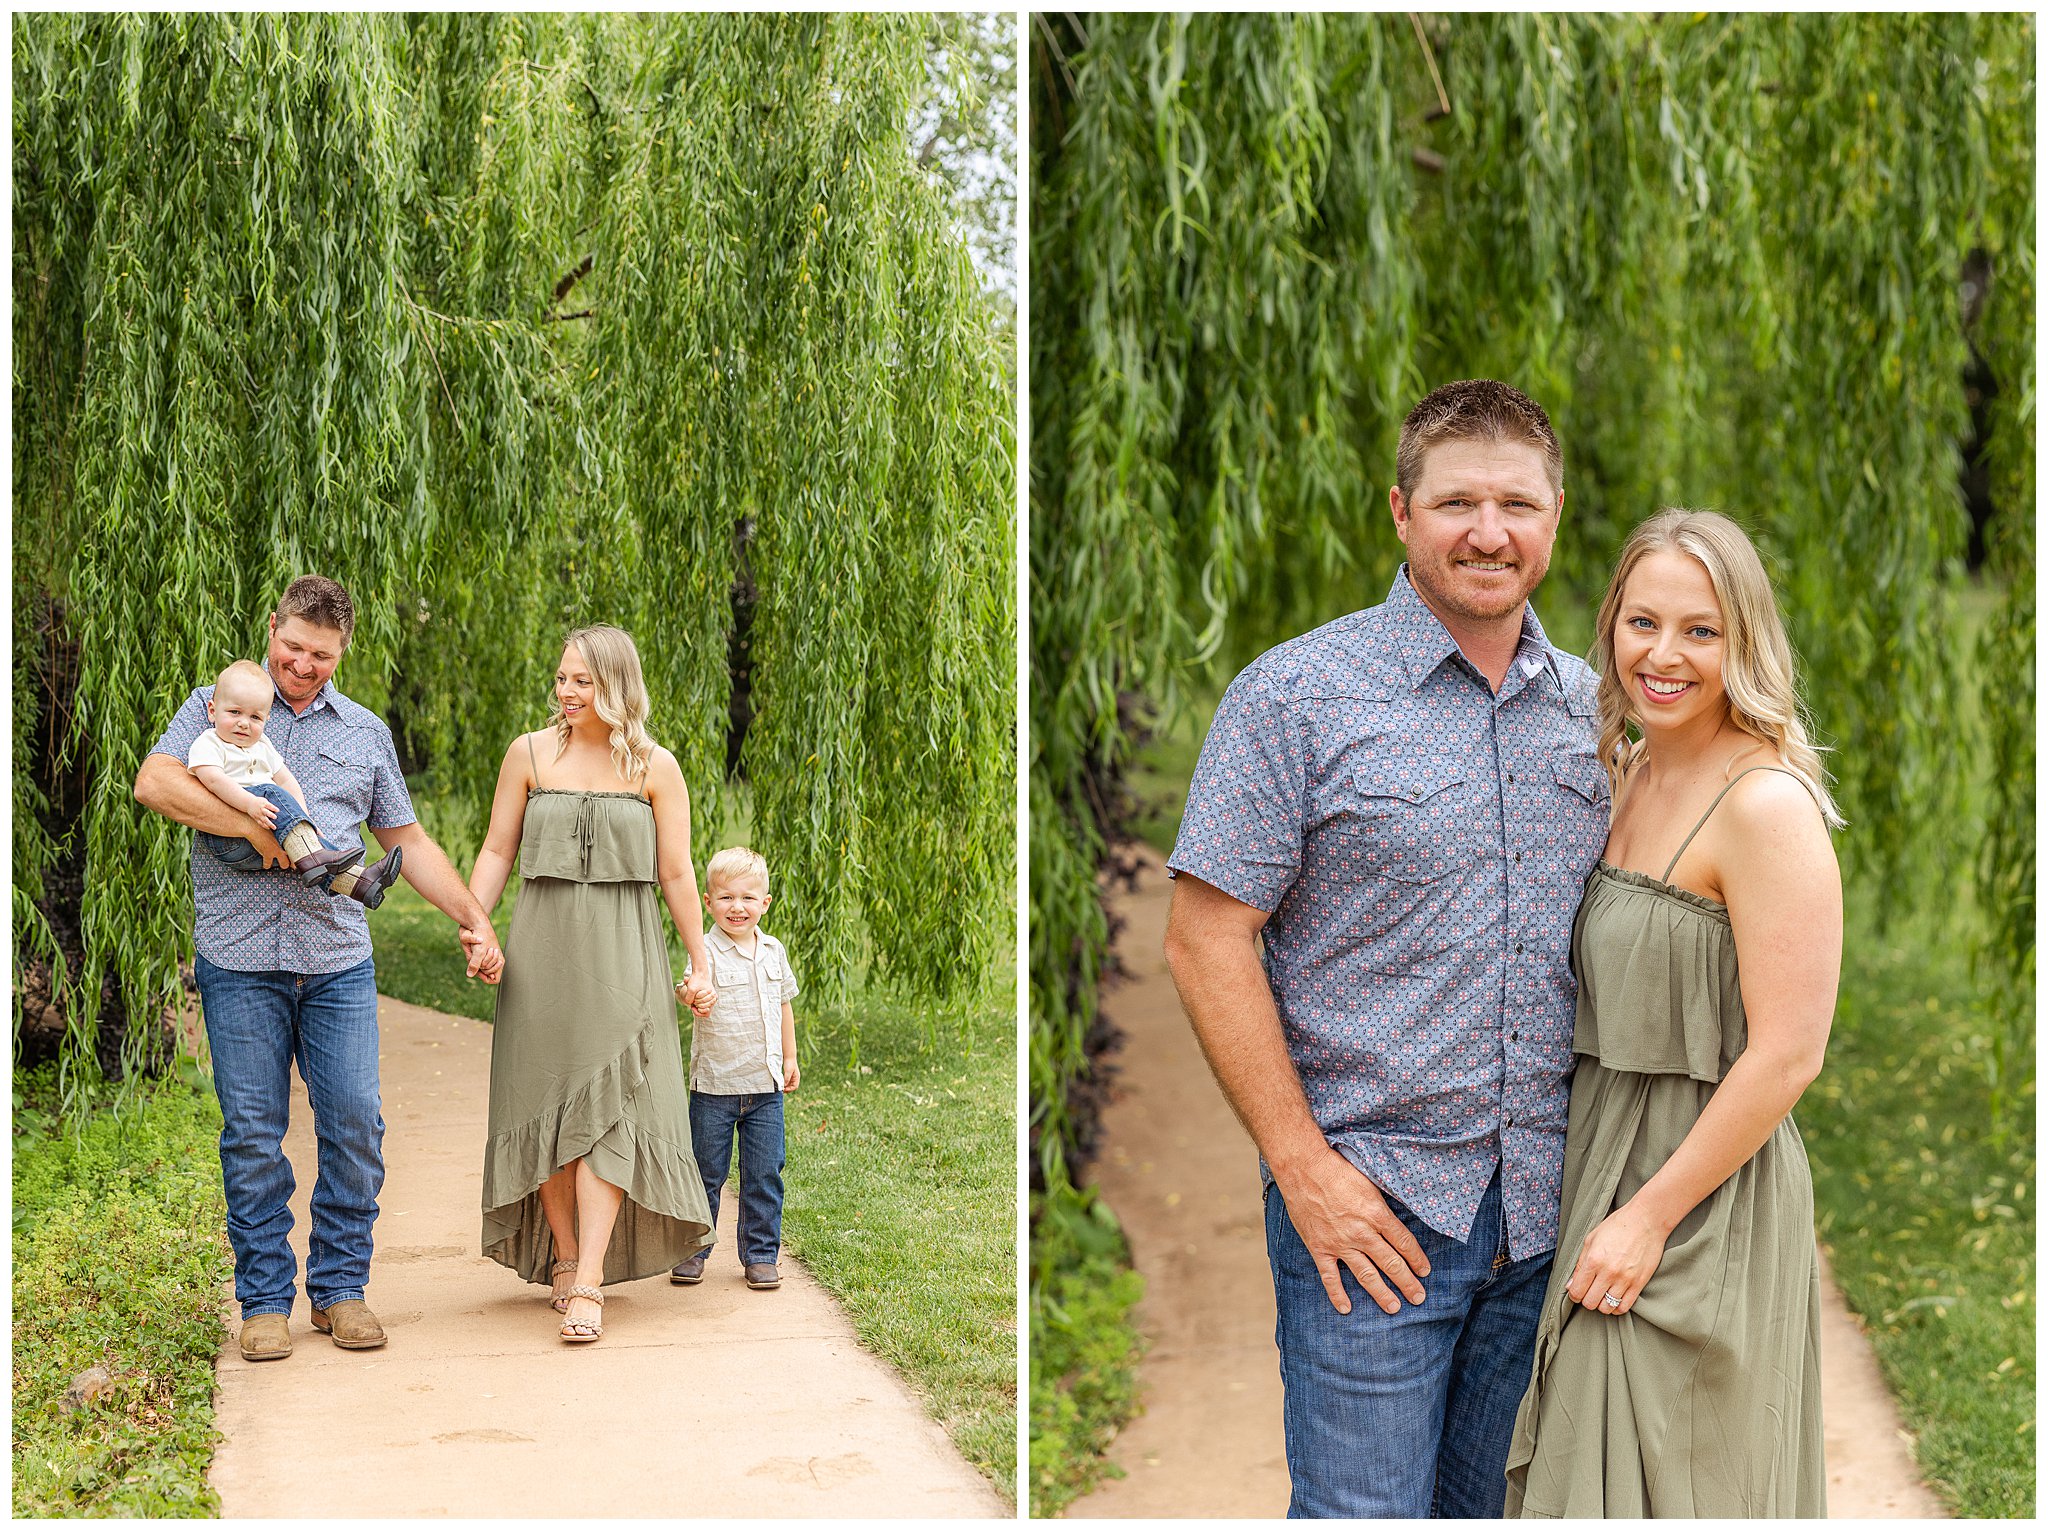 White Ranch Event Family Session Chico CA Spring May Willow Tree Brothers Boy Mom,